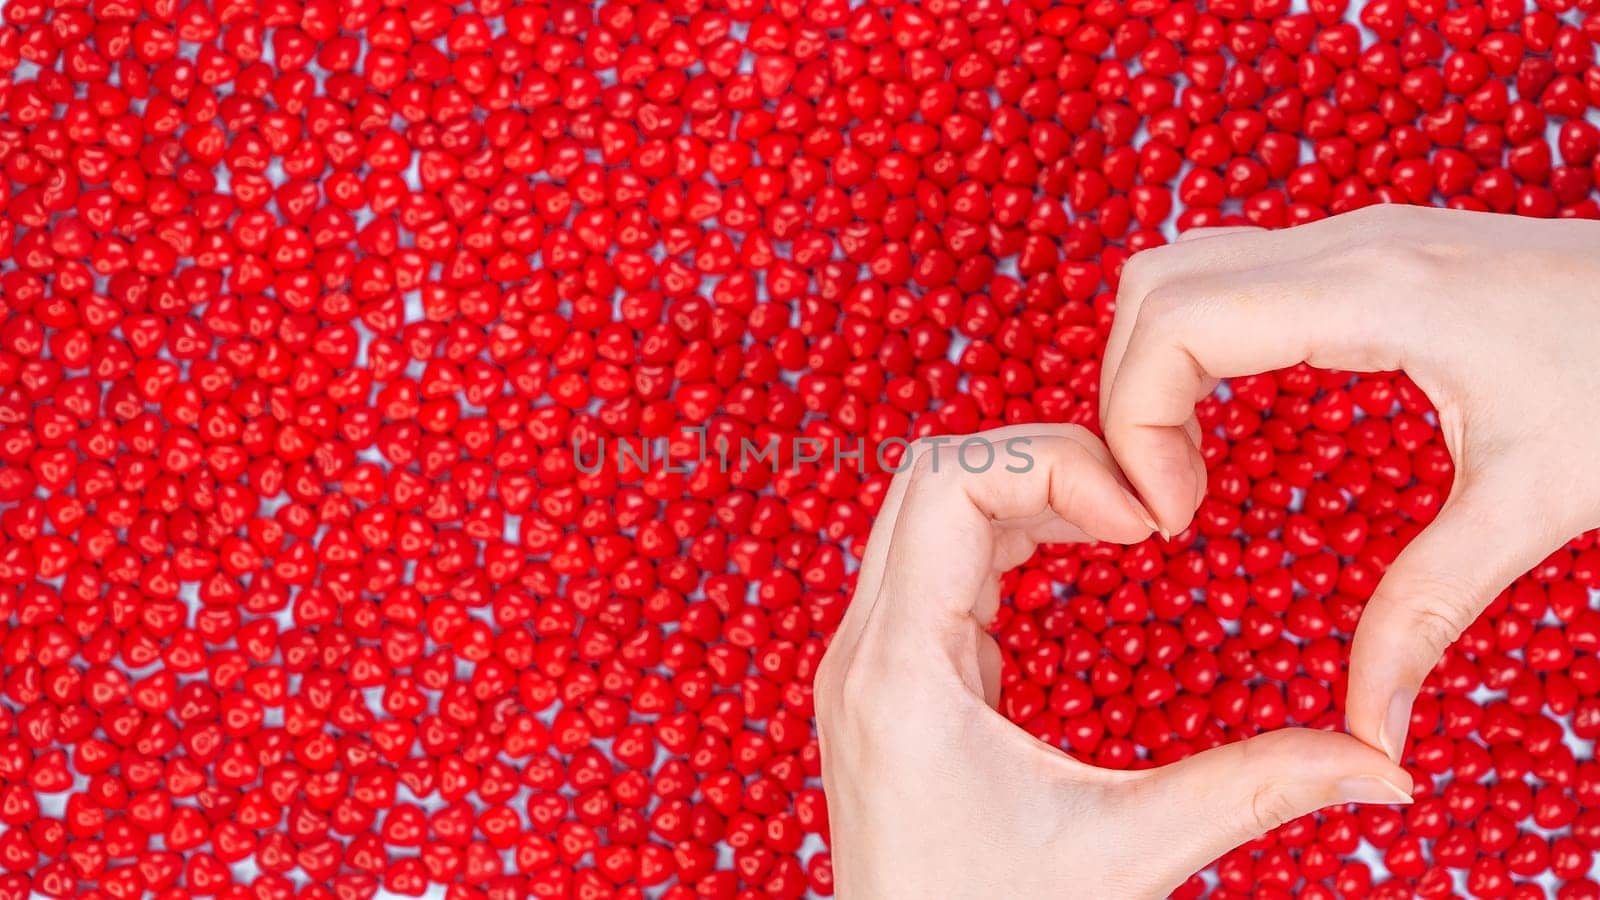 Woman hands making heart shape on red candy background. Heart from hands. Valentines Day concept. Symbol and shape of heart created from hands. Red peppermint candy. The concept of unity and charity